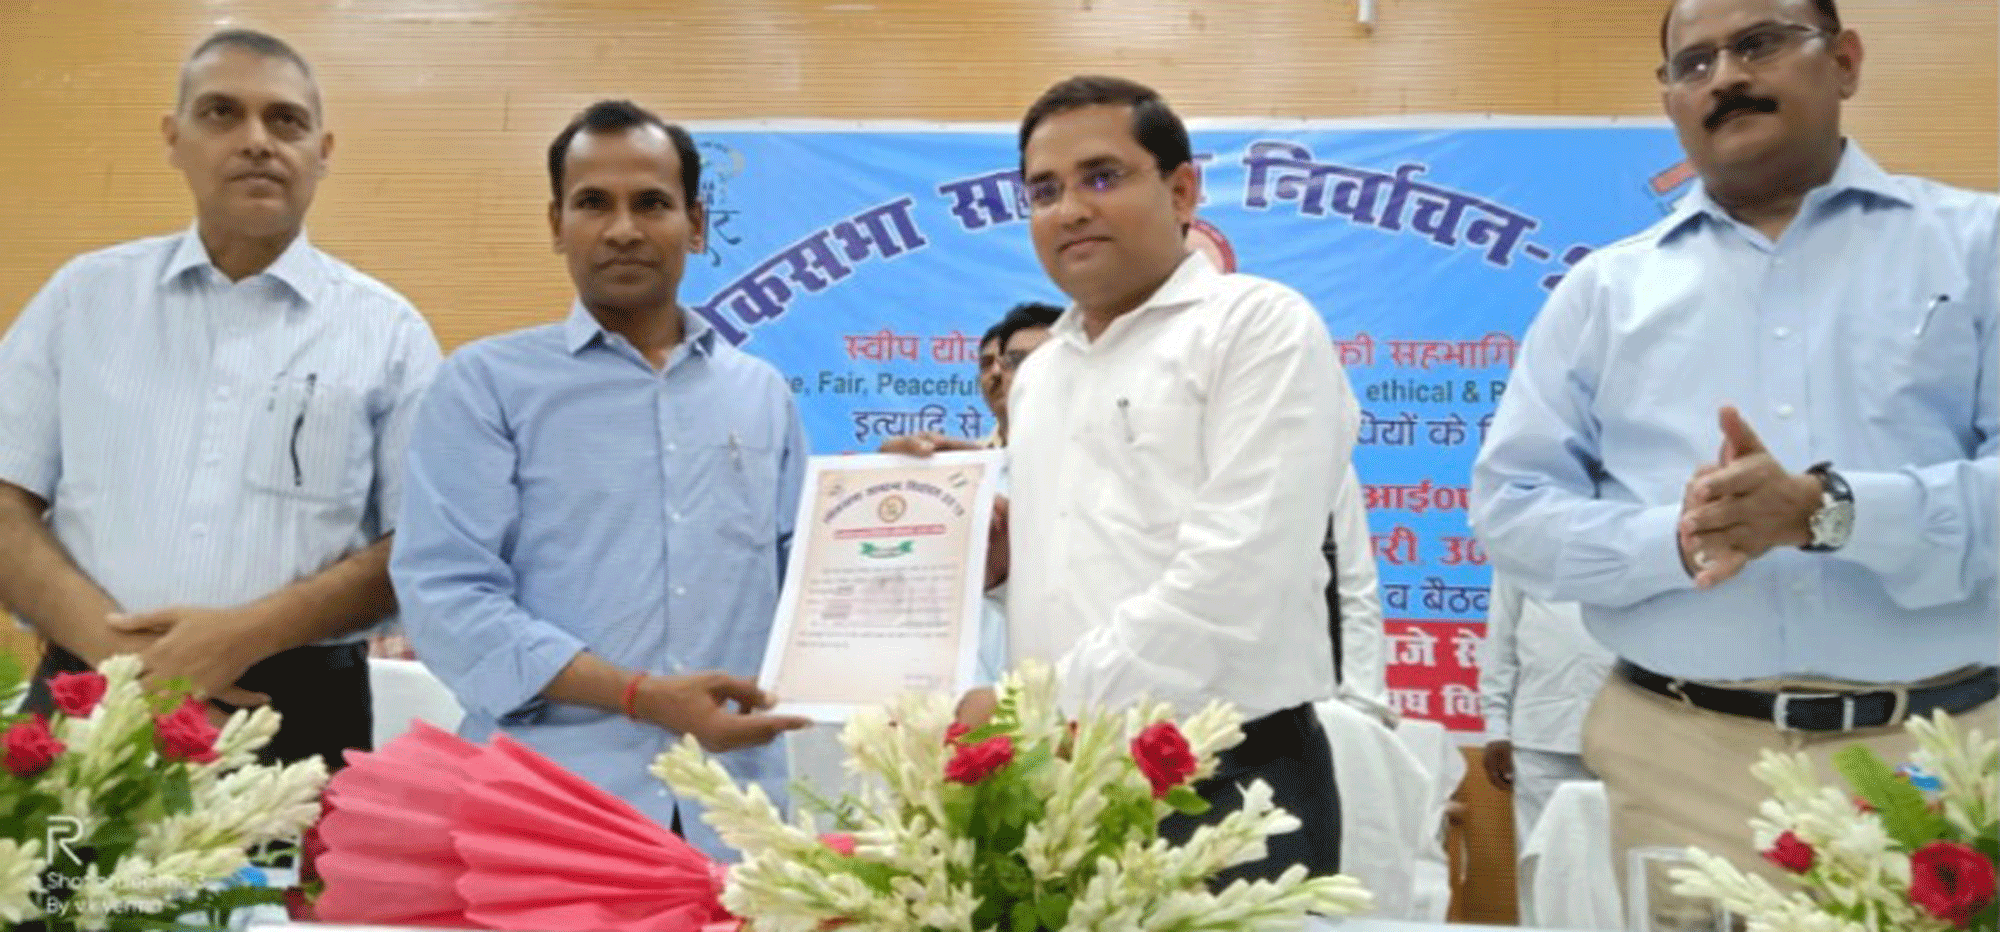 Chief Electoral Officer L. Vakteswar Loo honored DM Ayodhya